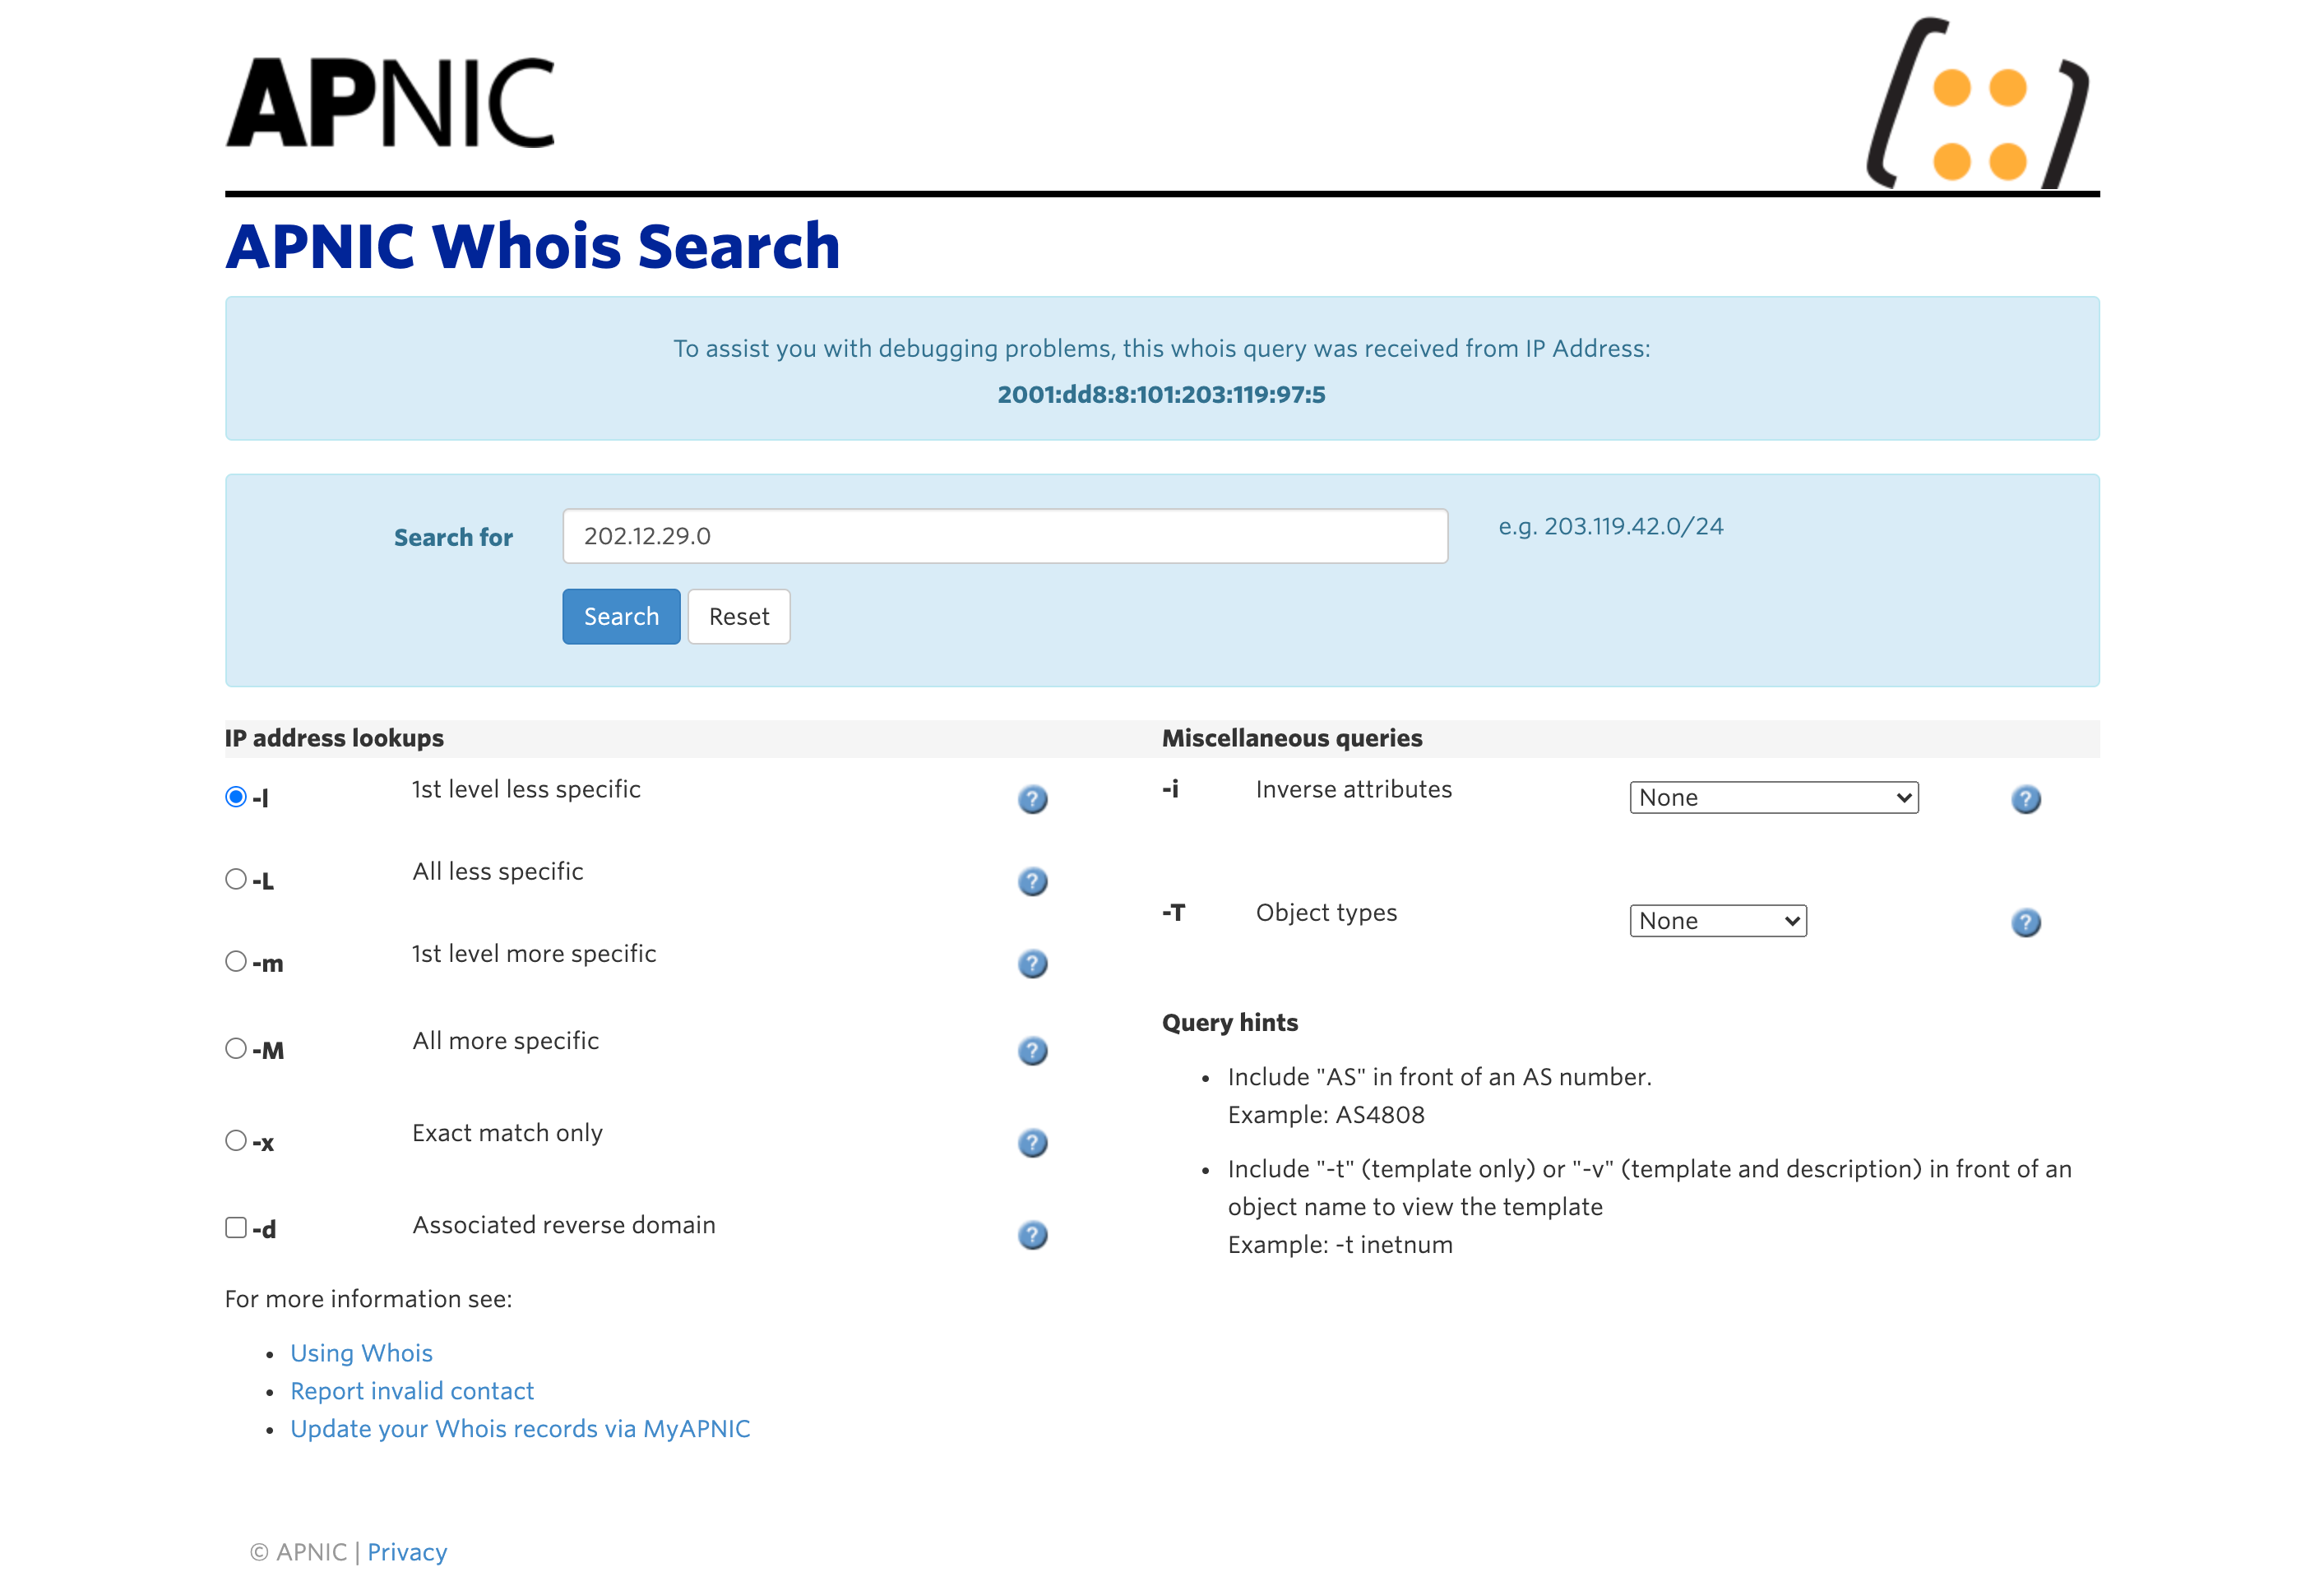 WHOIS Search